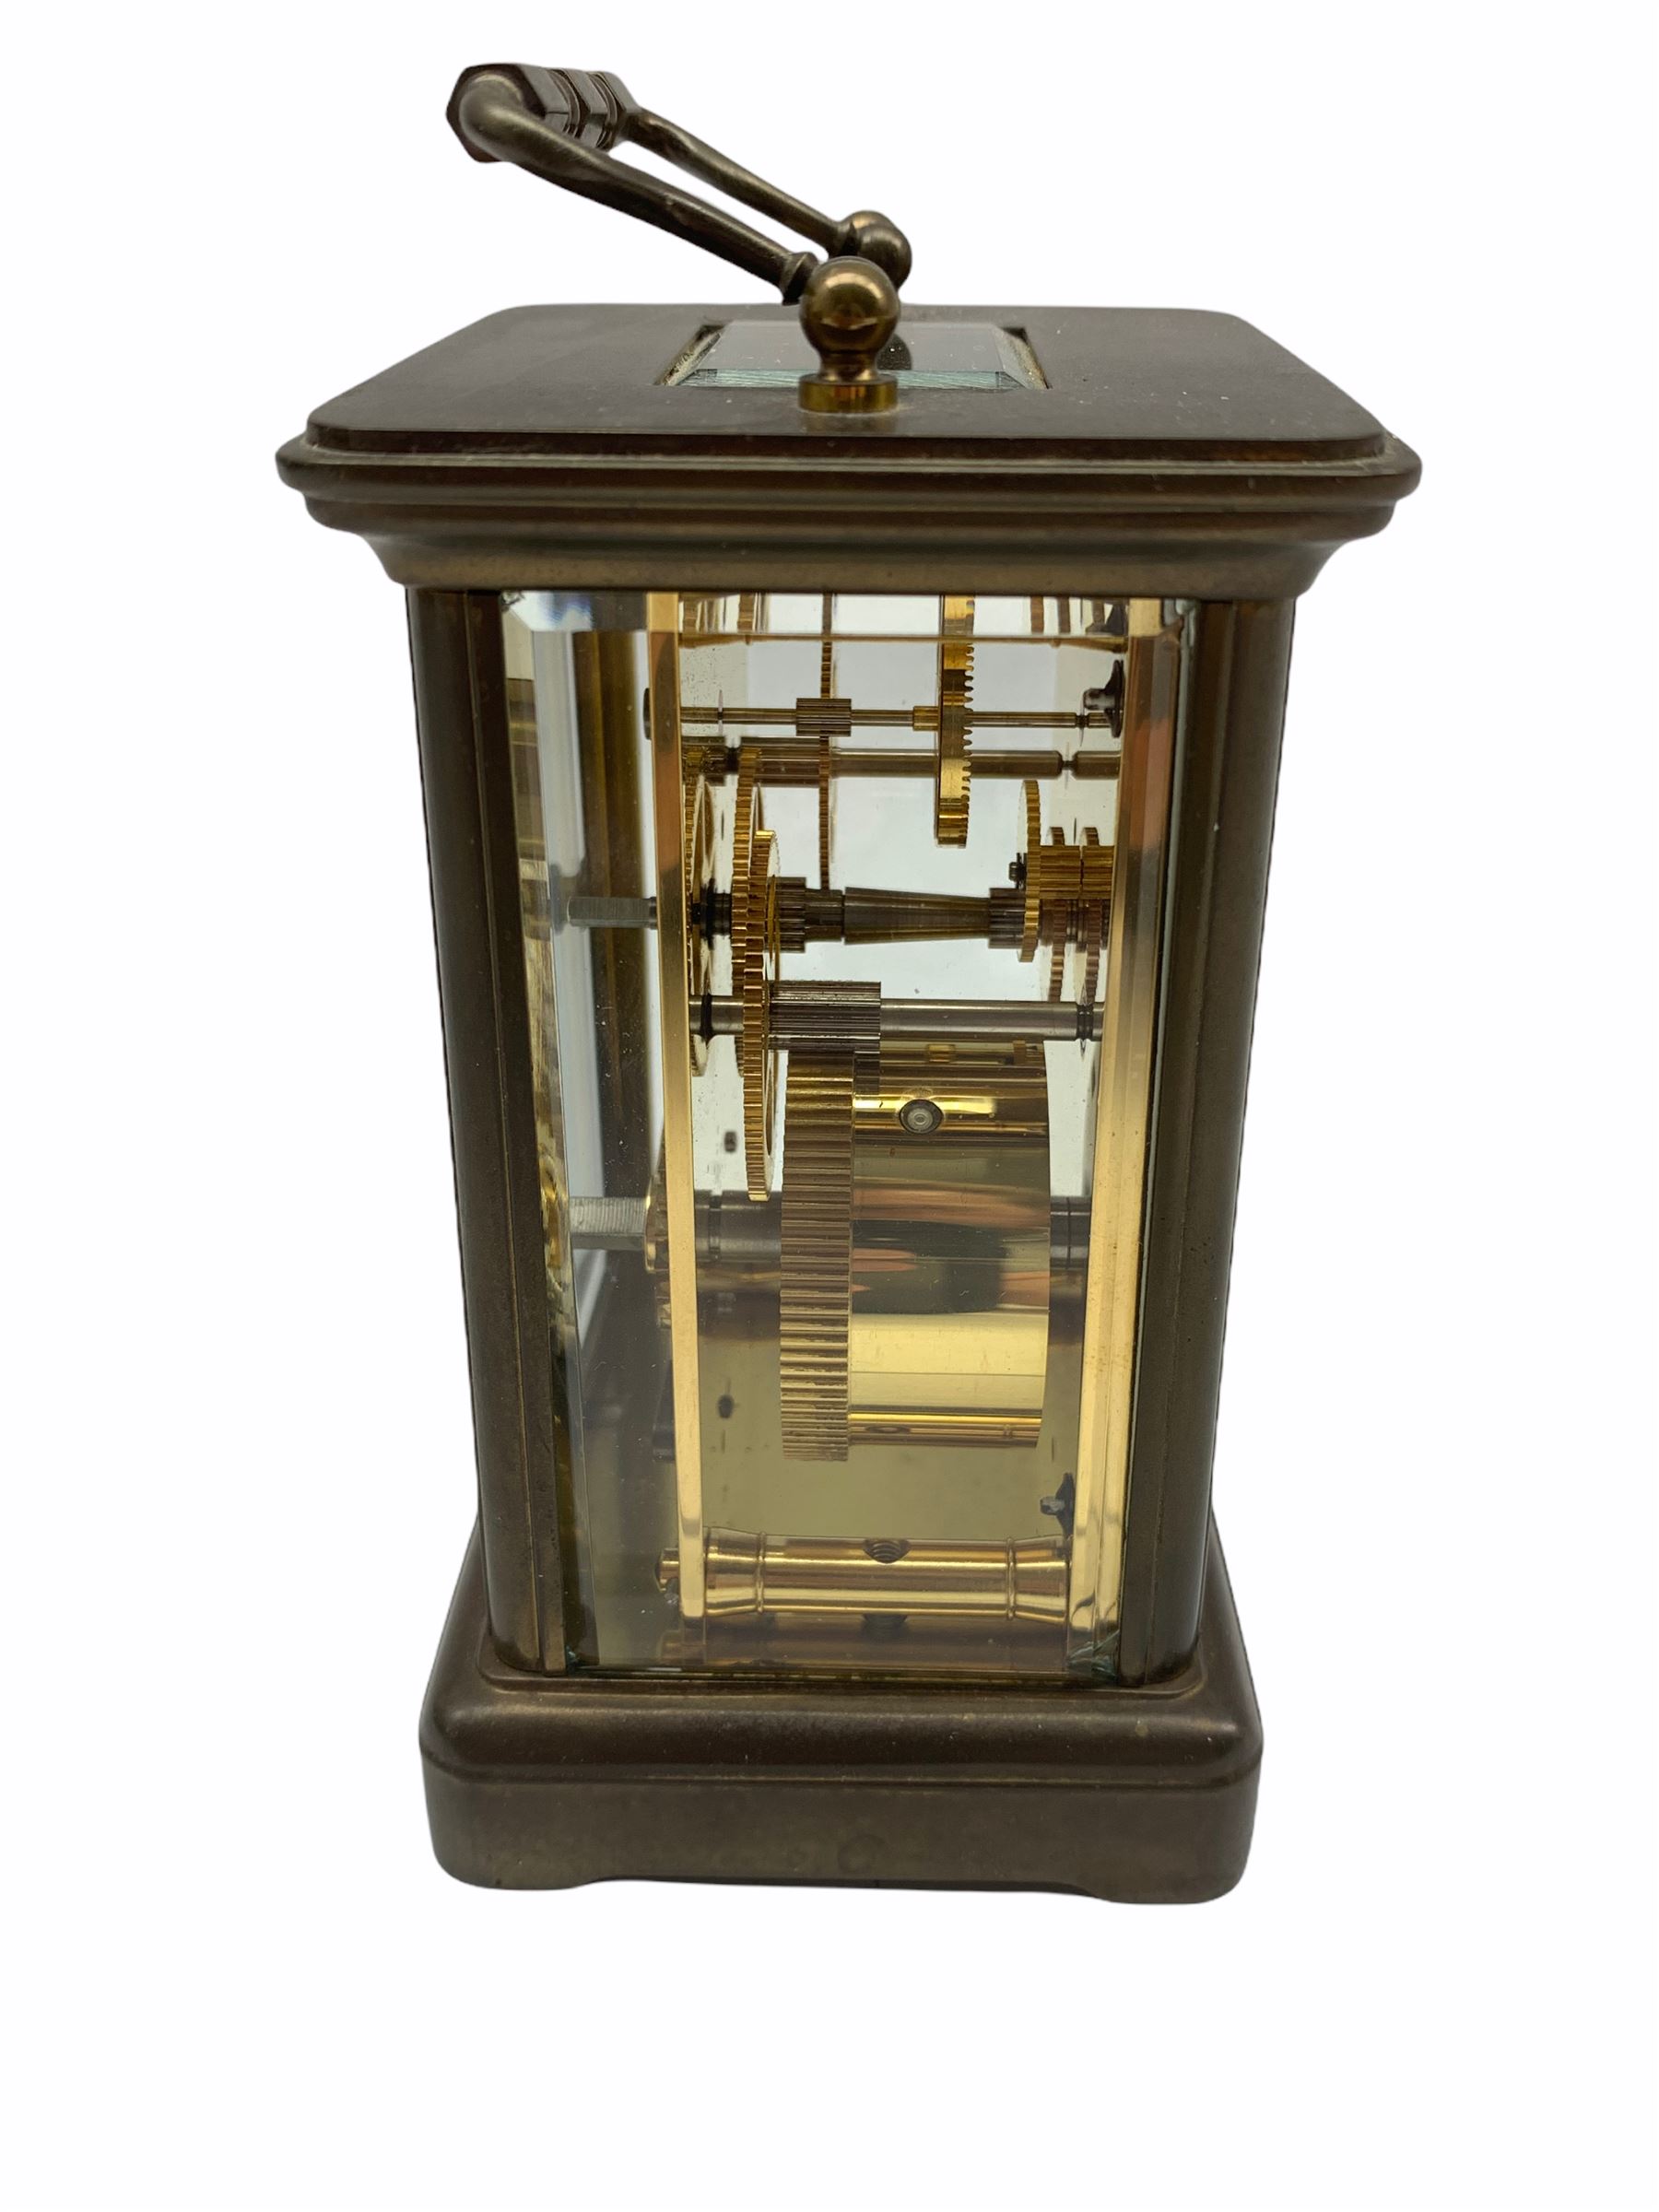 20th century Matthew Norman eight-day timepiece Carriage Clock with a lever platform escapement - Image 2 of 4